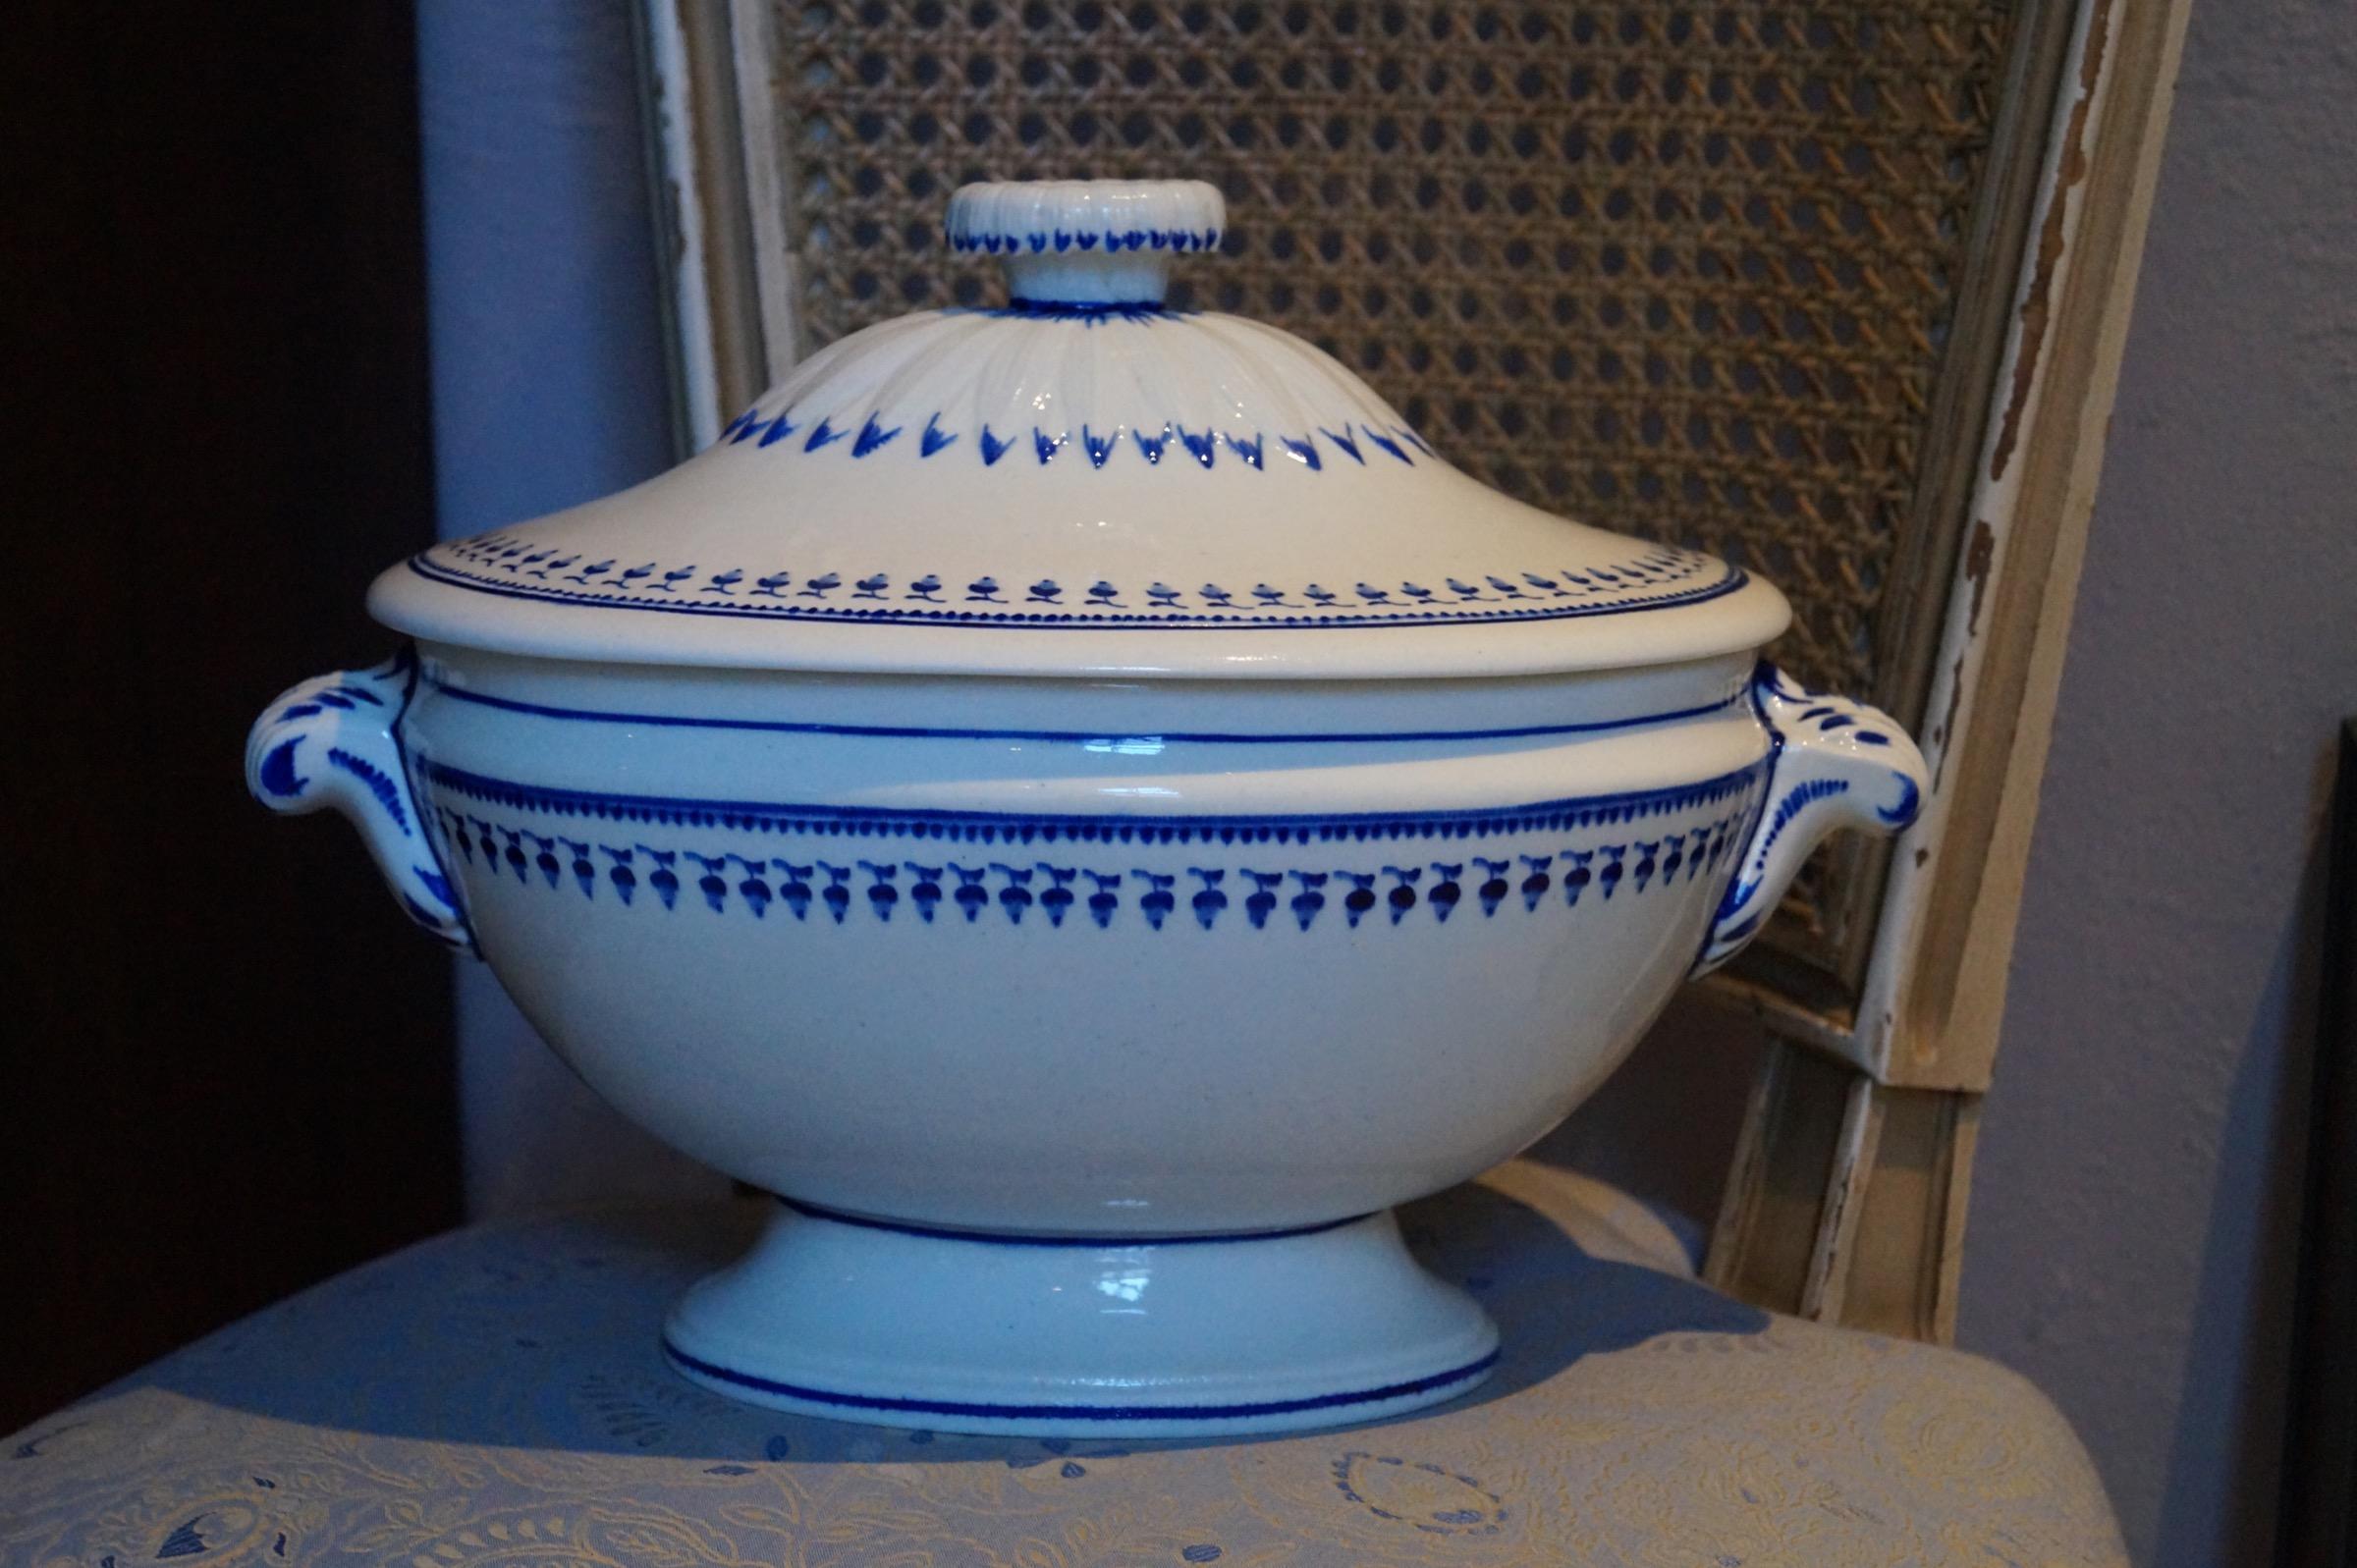 Rare hand painted porcelain de Tournai oval soup tureen
Belgium, 1790-1800
With hand painted blue decorations of leaves.
Measures: 22.5 cm x 29 cm (38 cm with arms) height 27 cm.
Perfect condition! Very rare with this age.

   